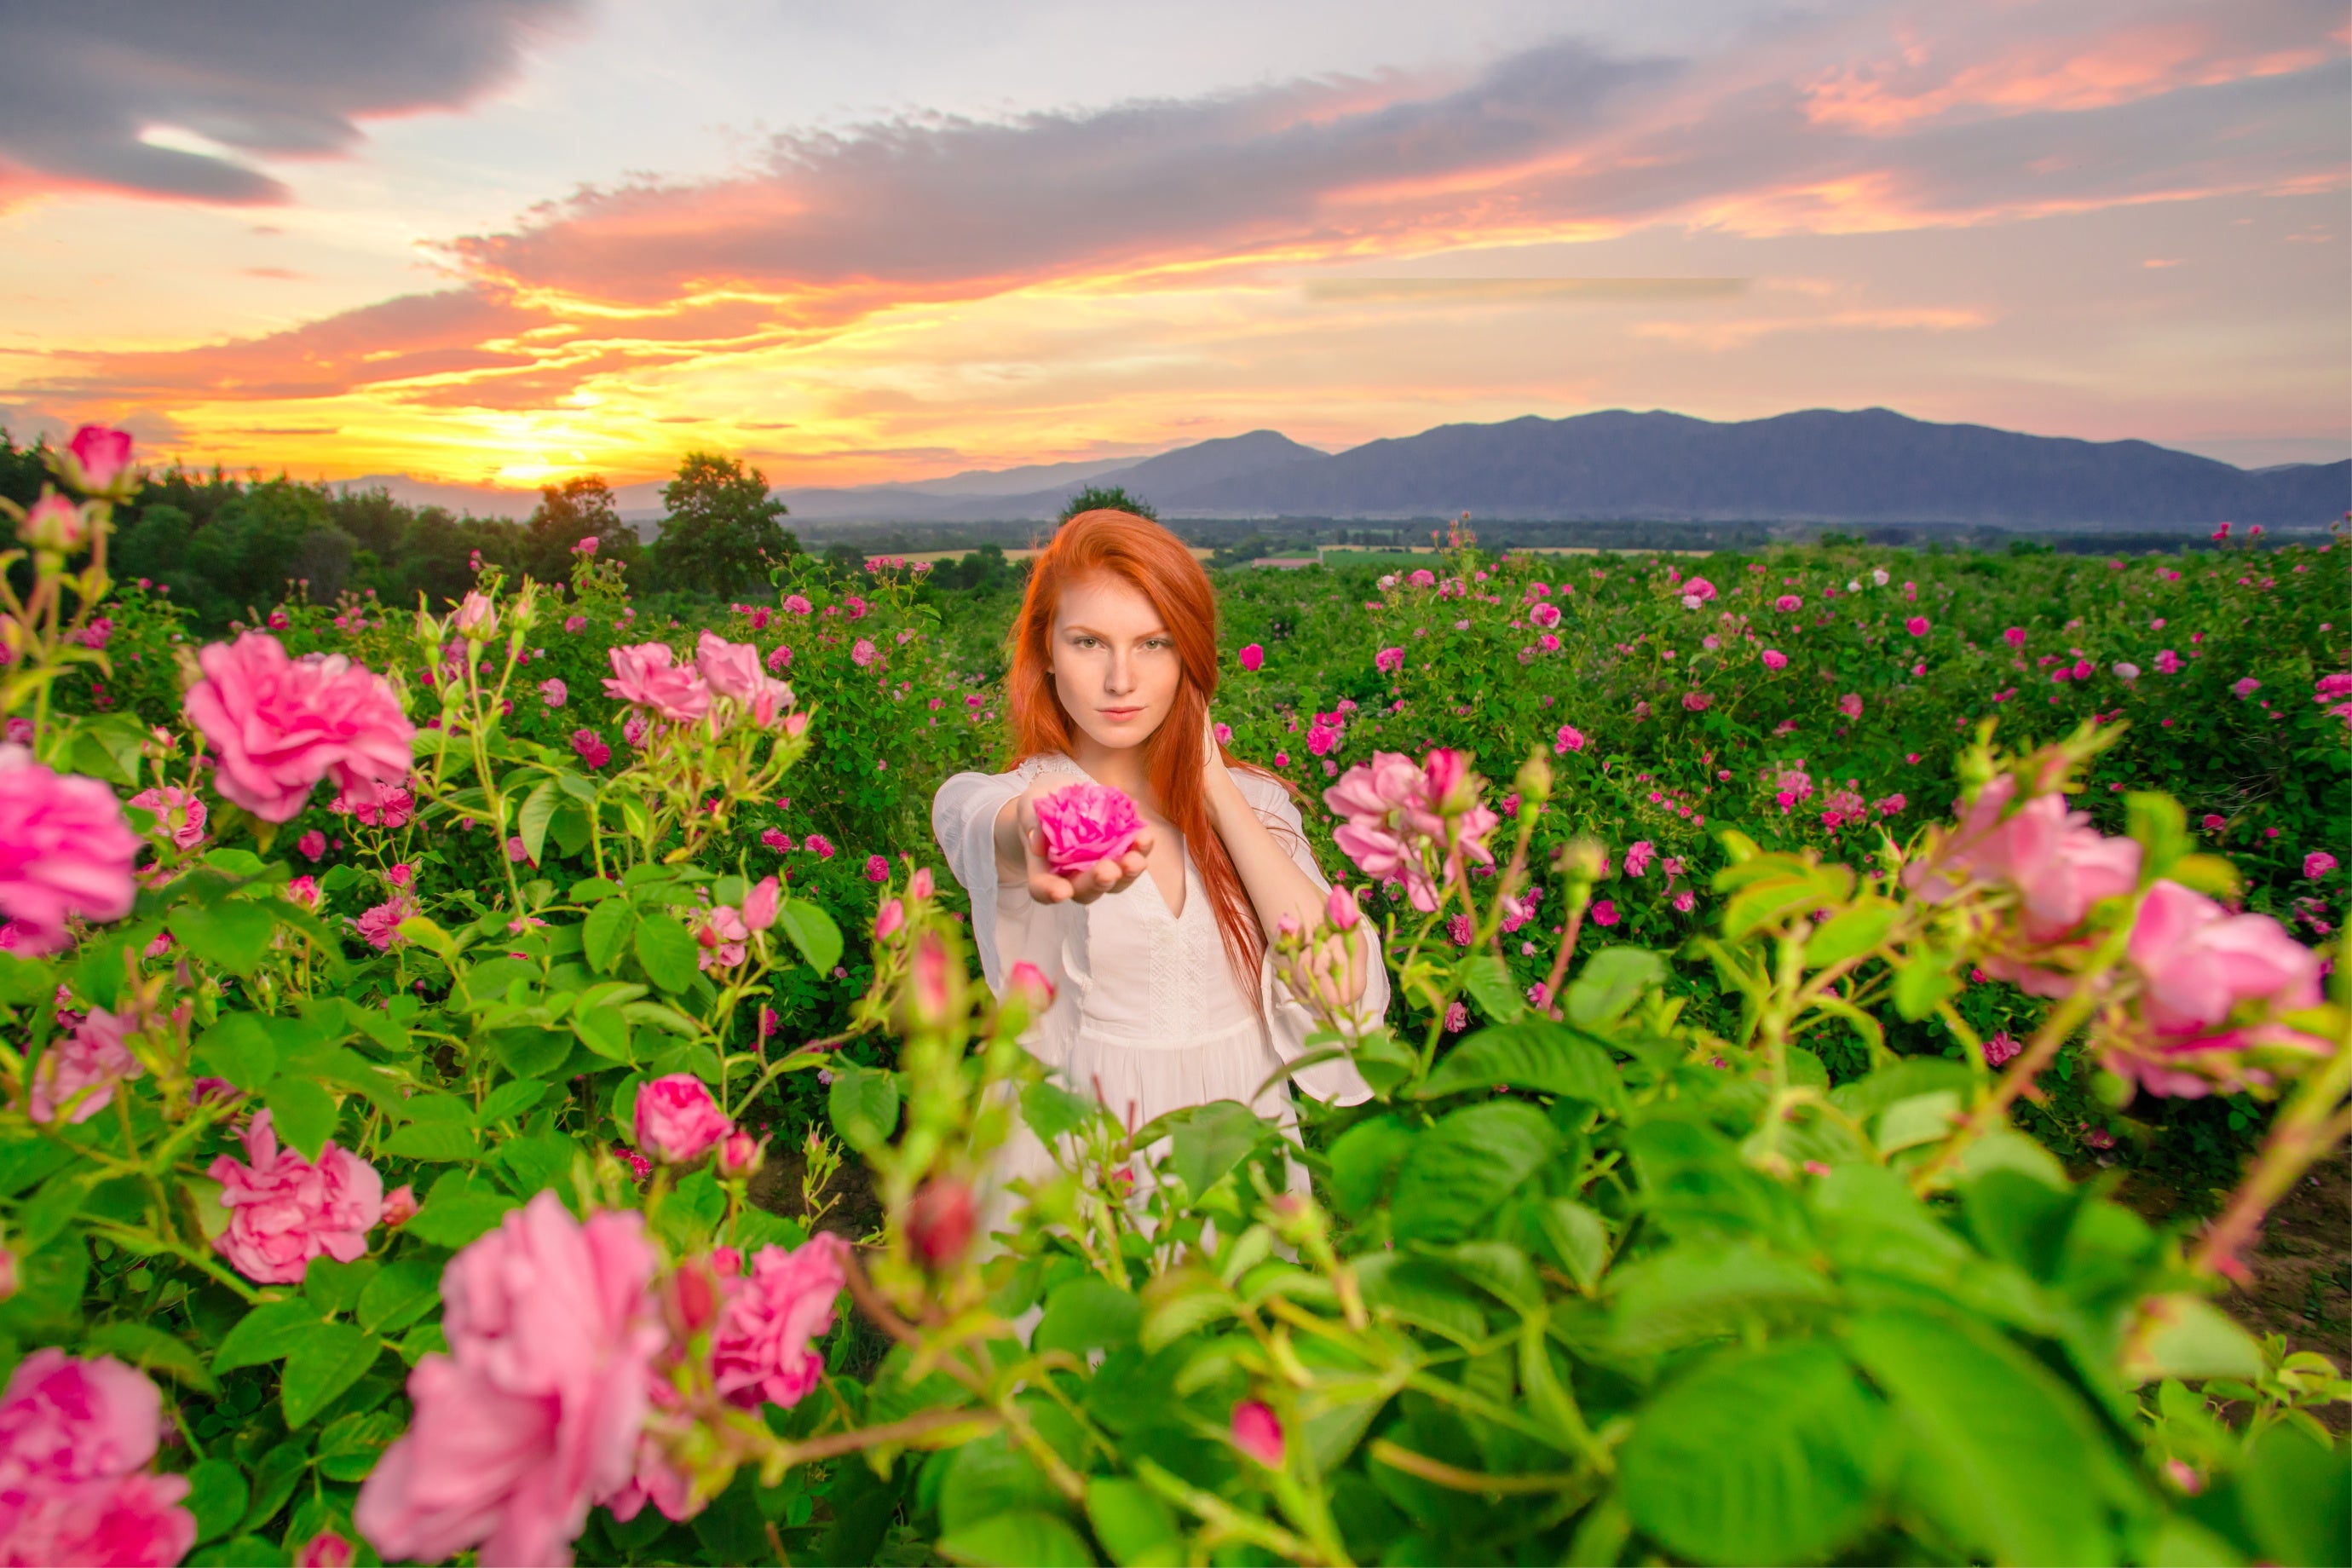 A woman surrounded by Bulgarian roses at sunset.